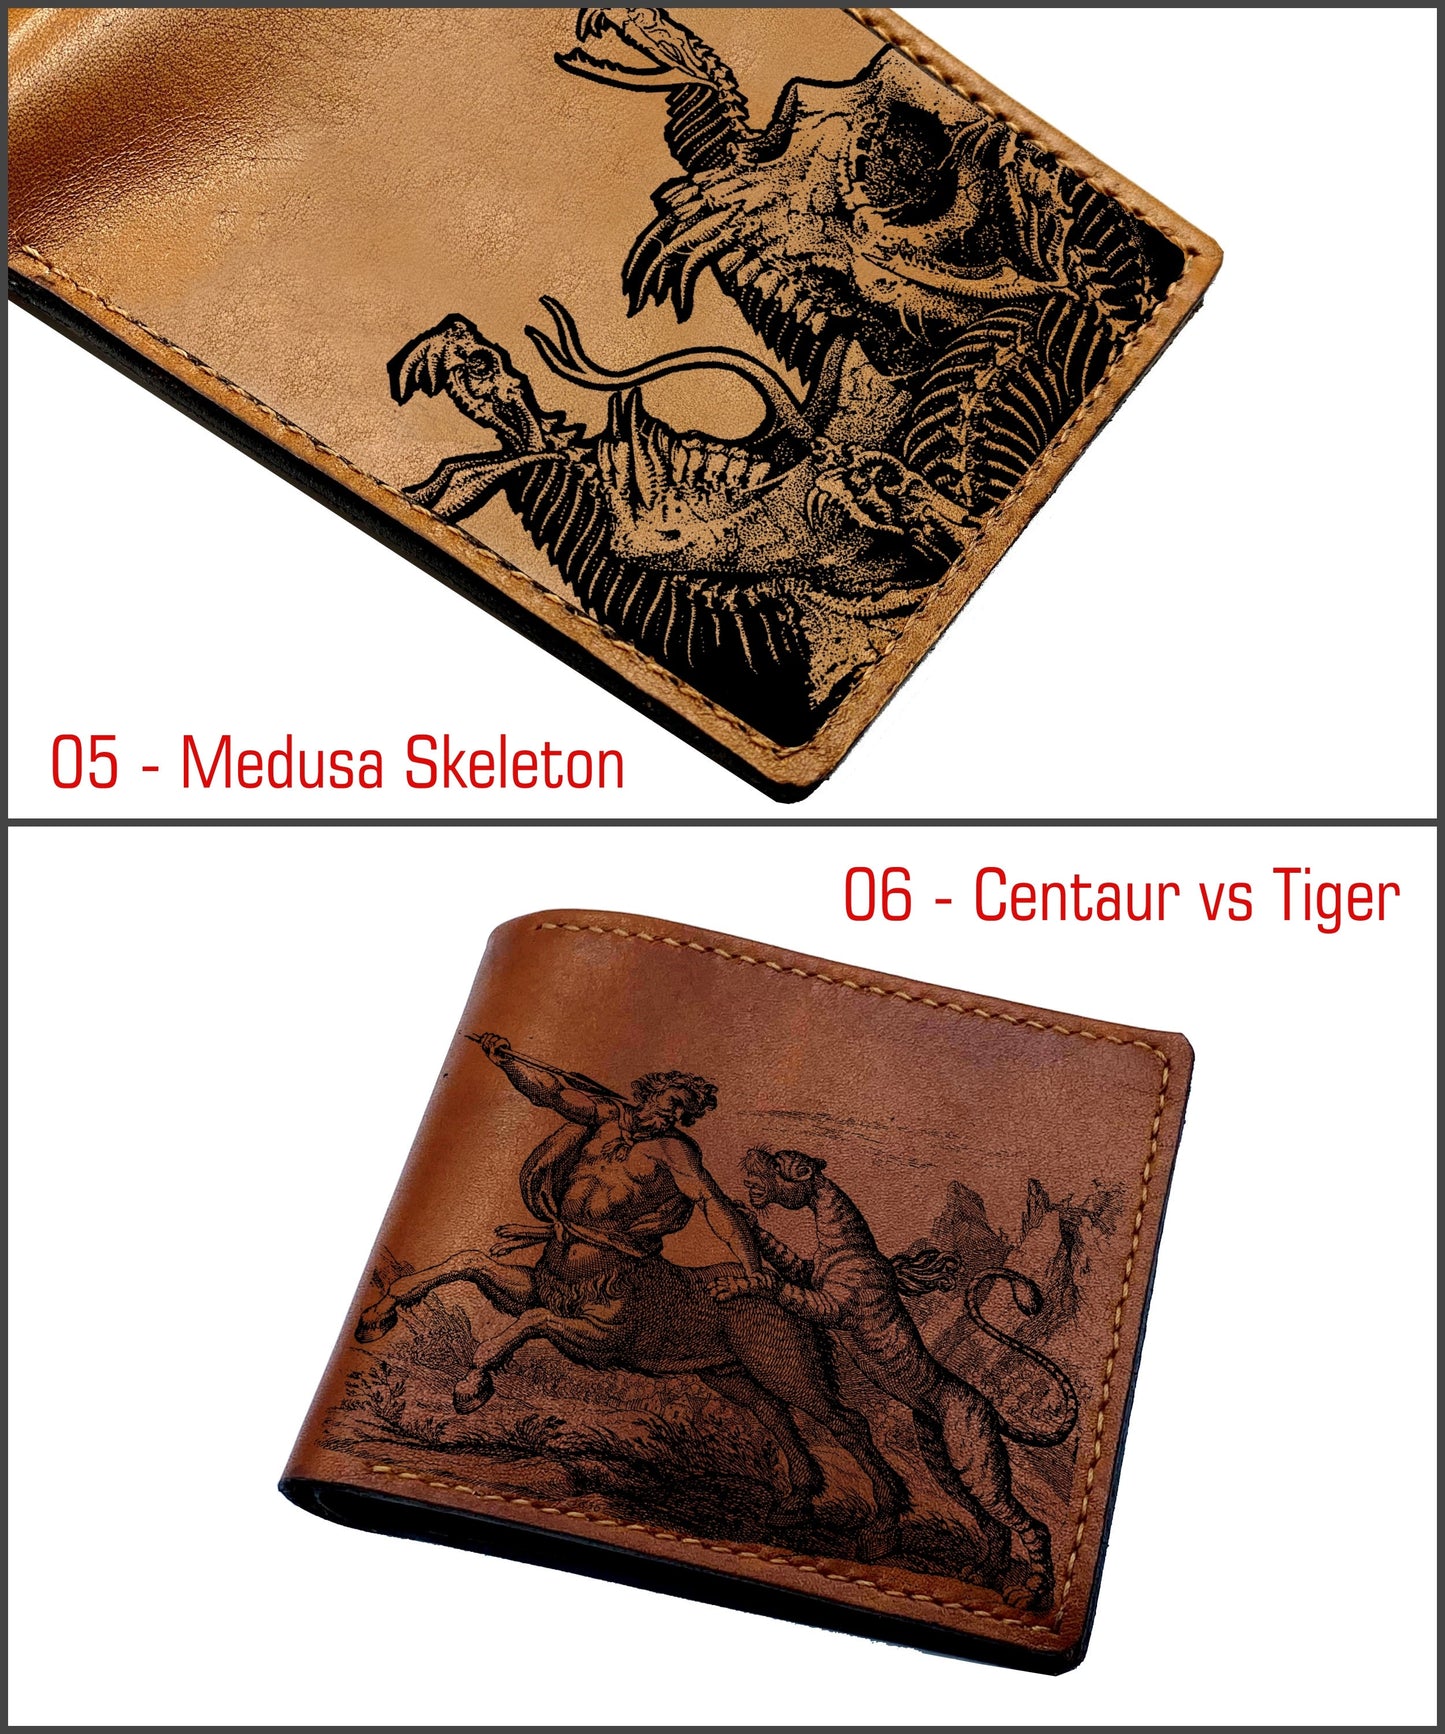 Minotaur leather men's wallet, monster engraved leather gift for men, customized present for dad, leather anniversary gift for husband